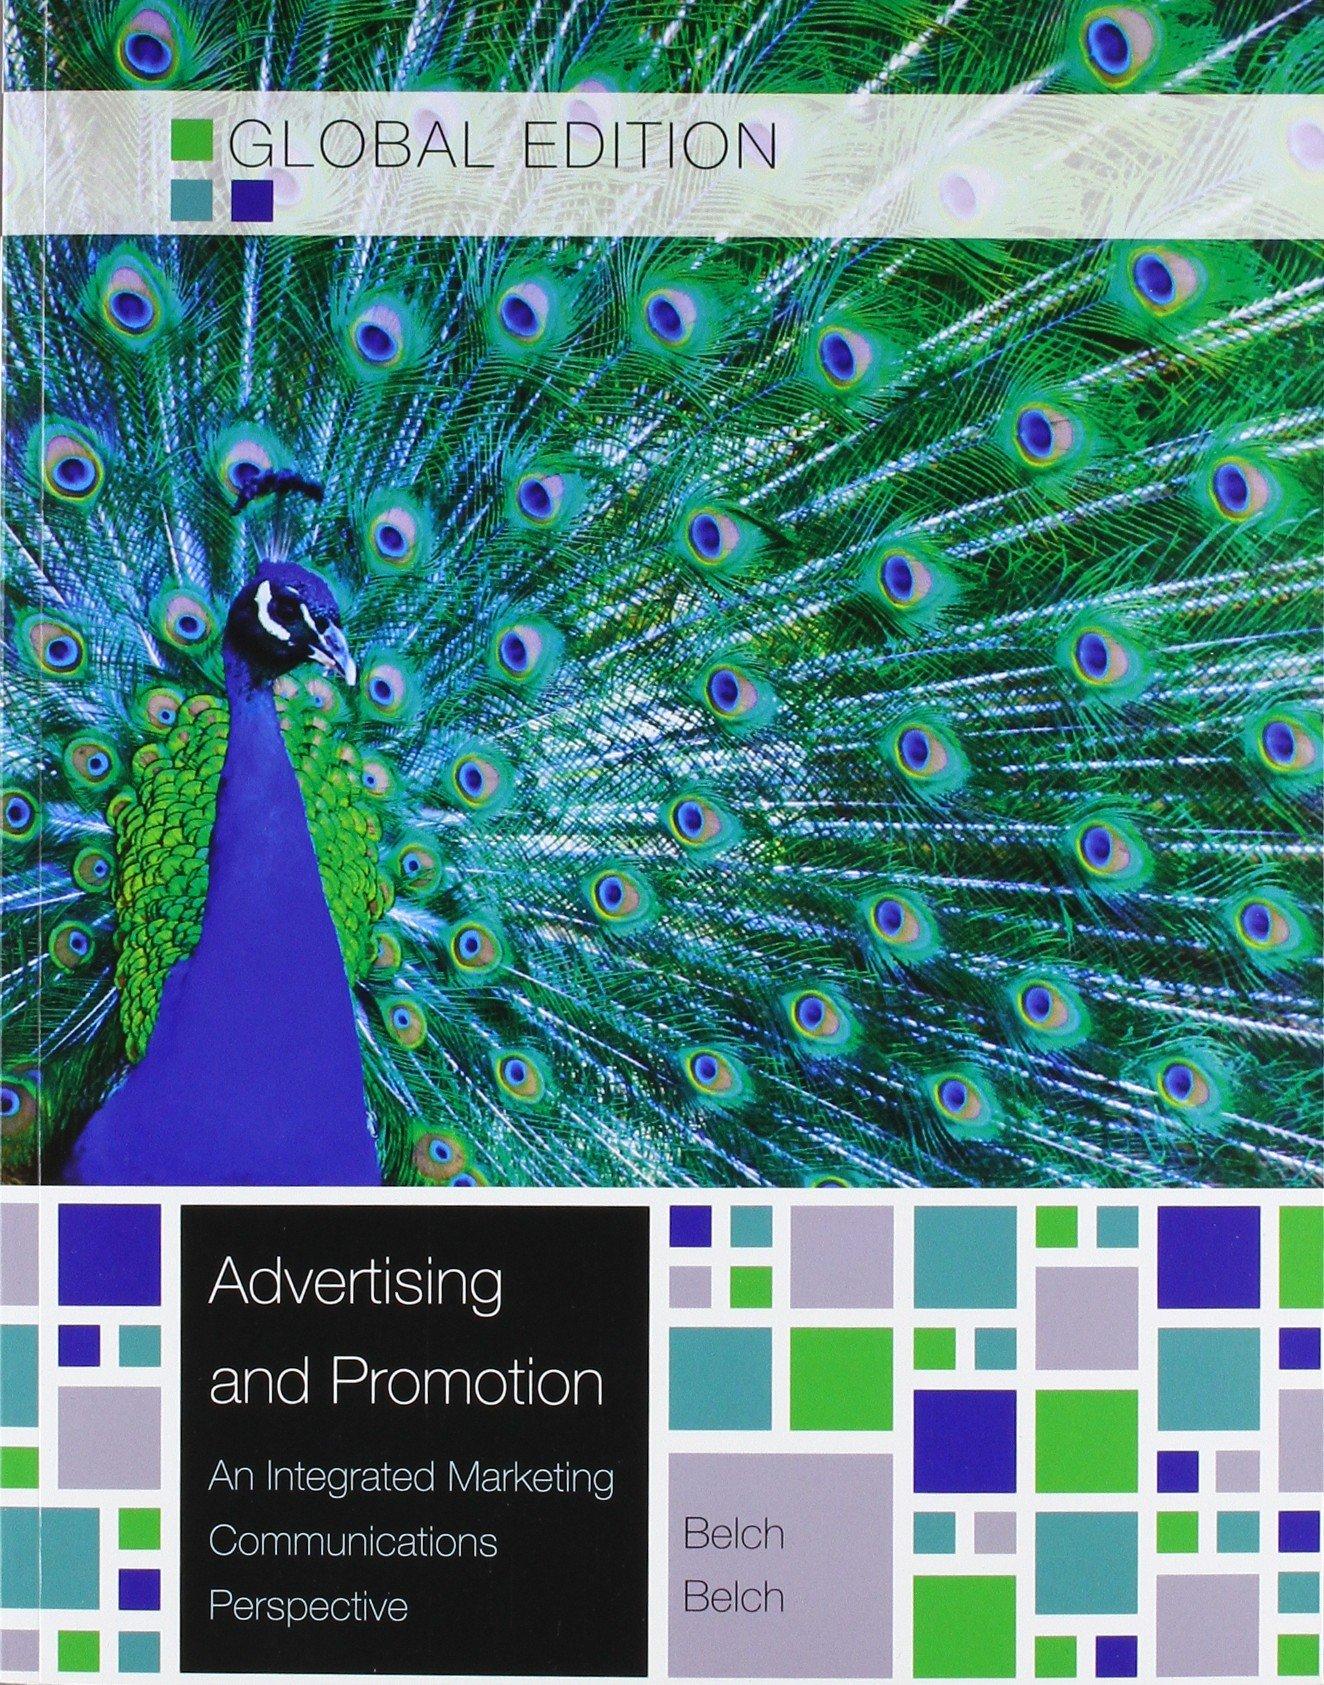 advertising and promotion an integrated marketing communications perspective 9th global edition george belch,